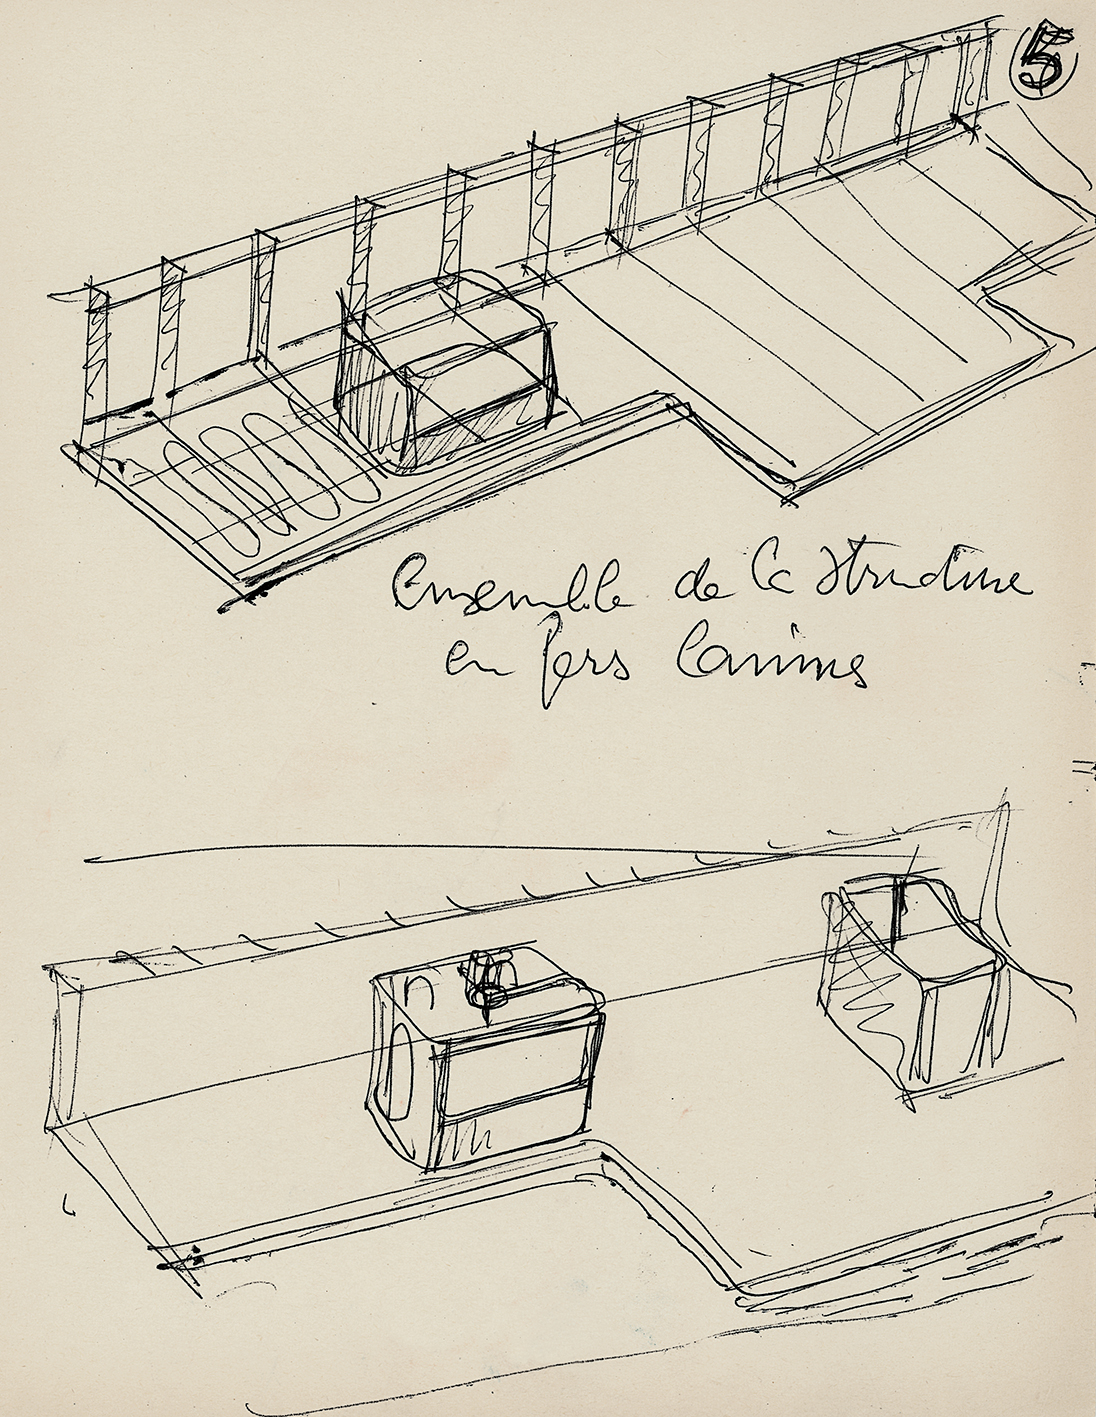 Jean Prouvé. “The overall structure in laminated steel”. Preparatory drawing for his class The Nancy House given at the CNAM (Conservatoire National des Arts et Métiers), Paris, 1957–71.